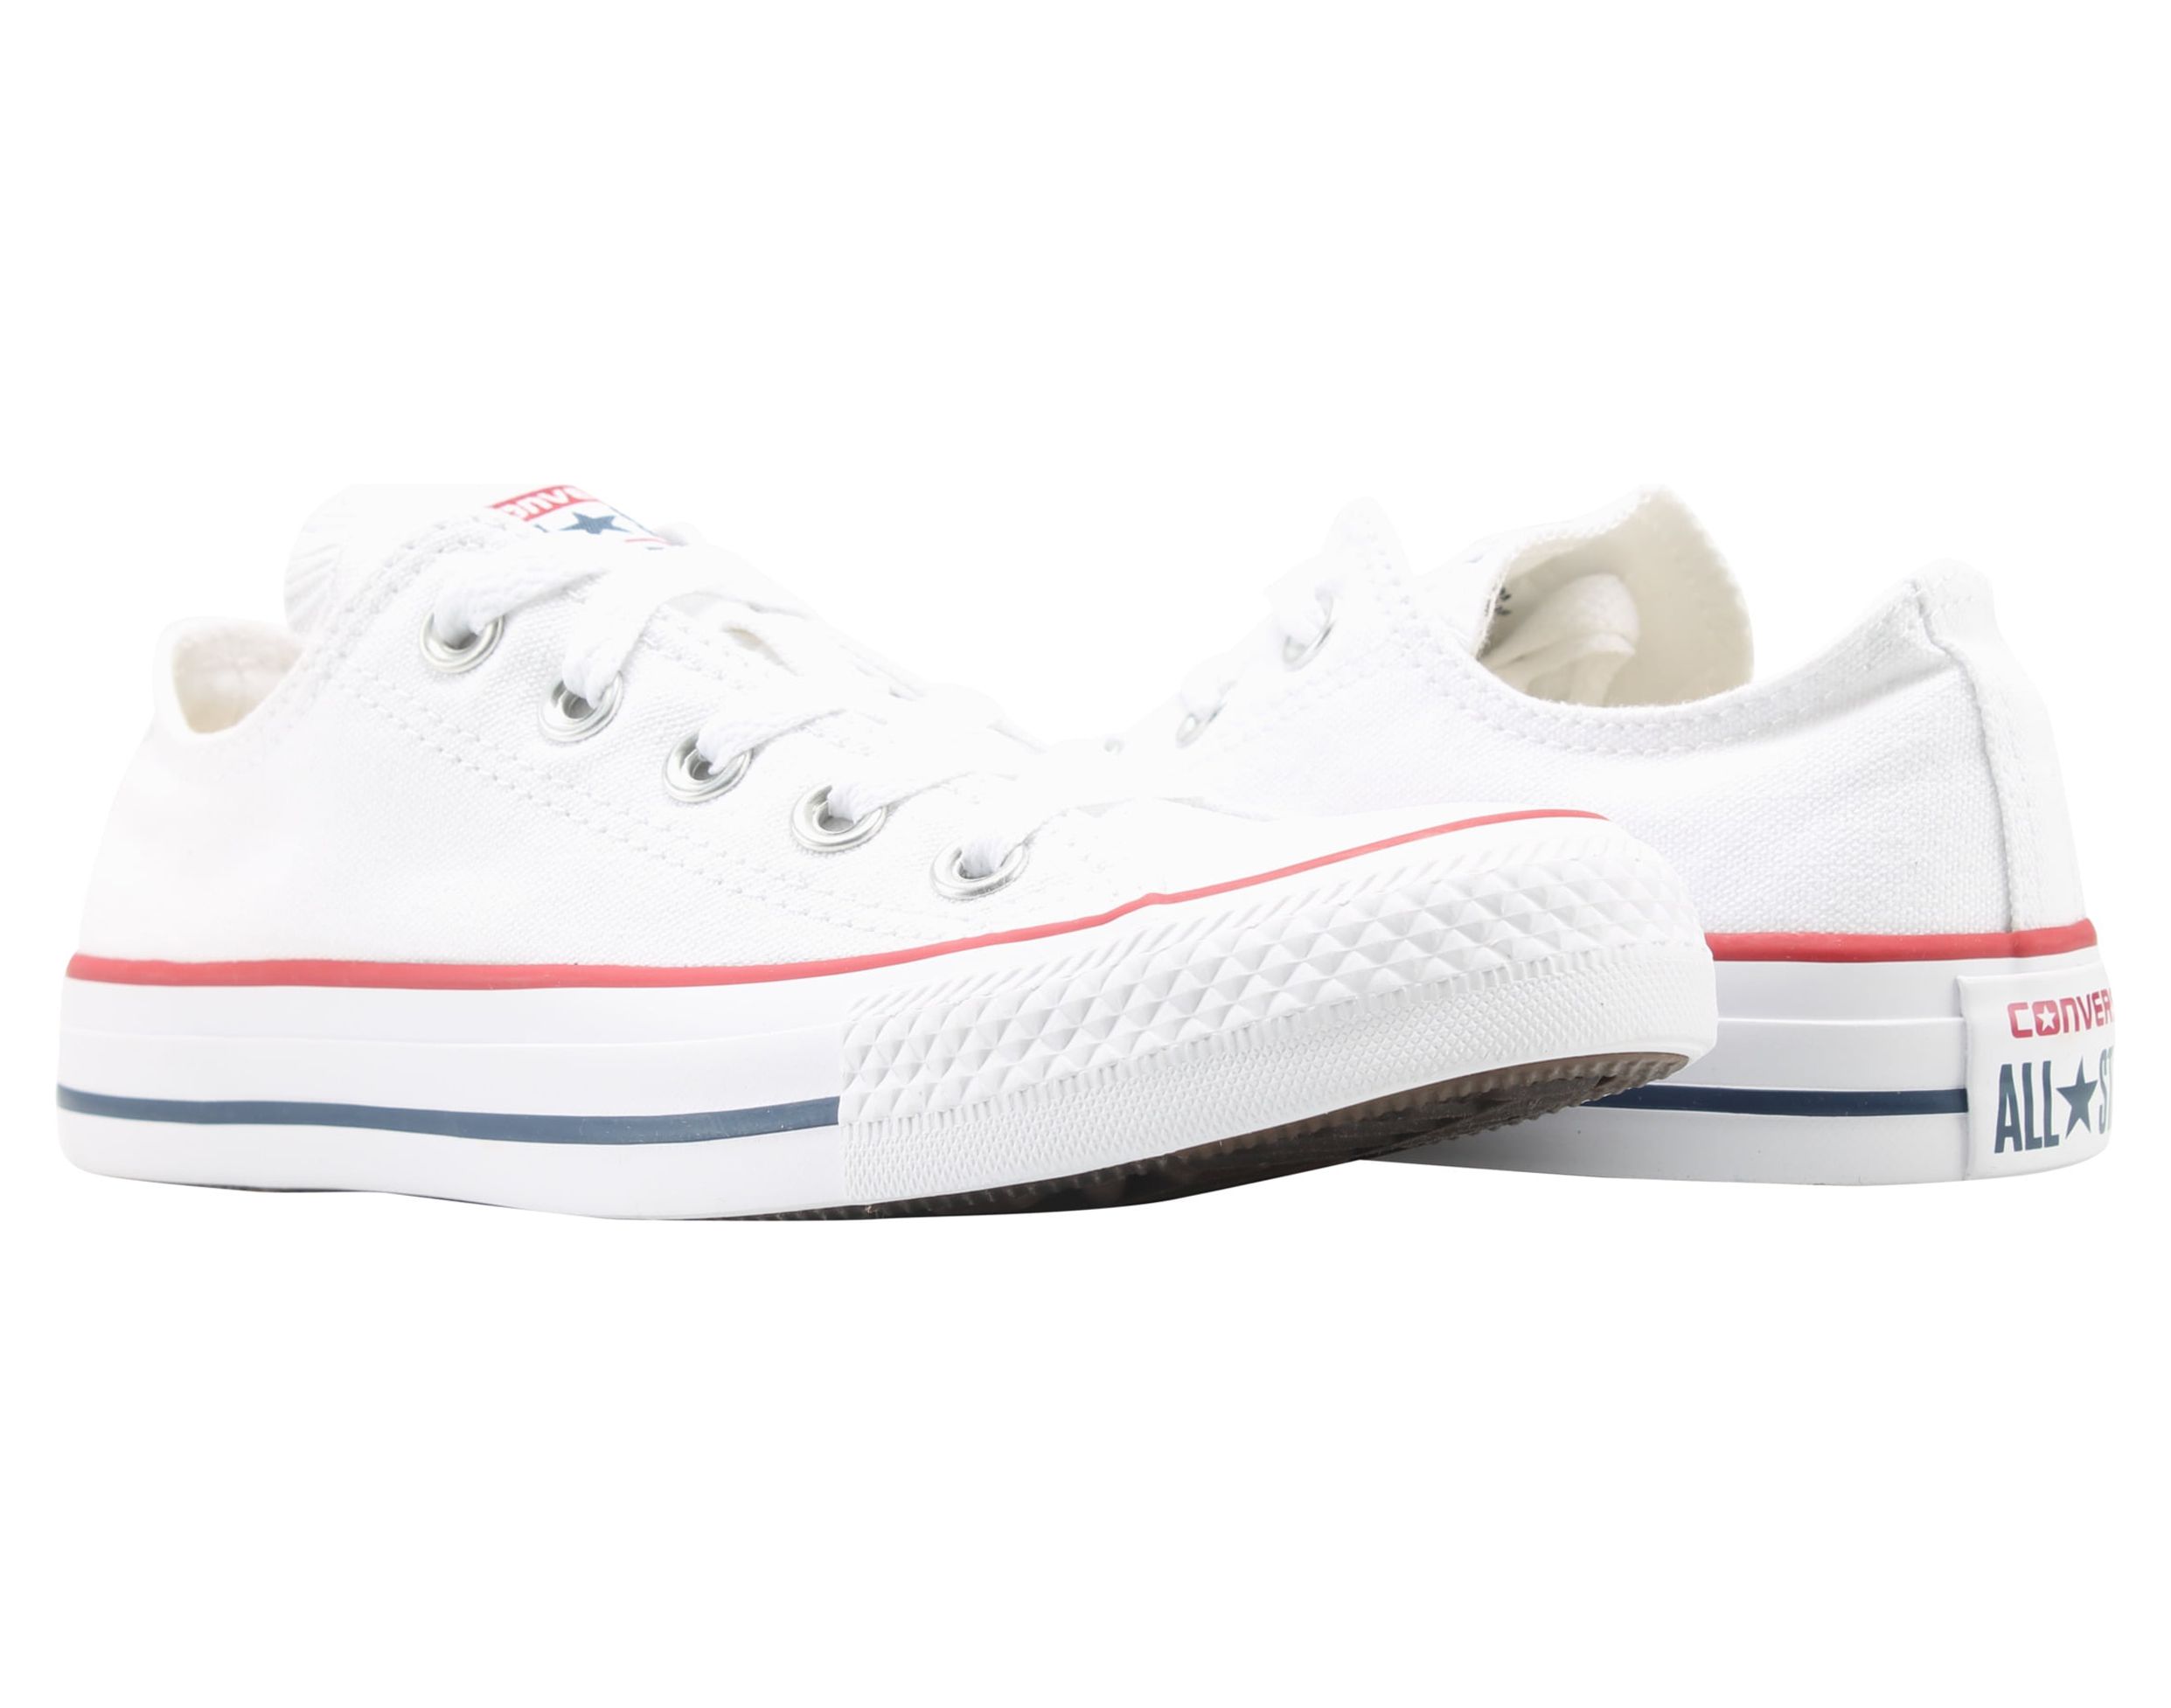 Converse Chuck Taylor All Star Low Sneaker - image 1 of 6